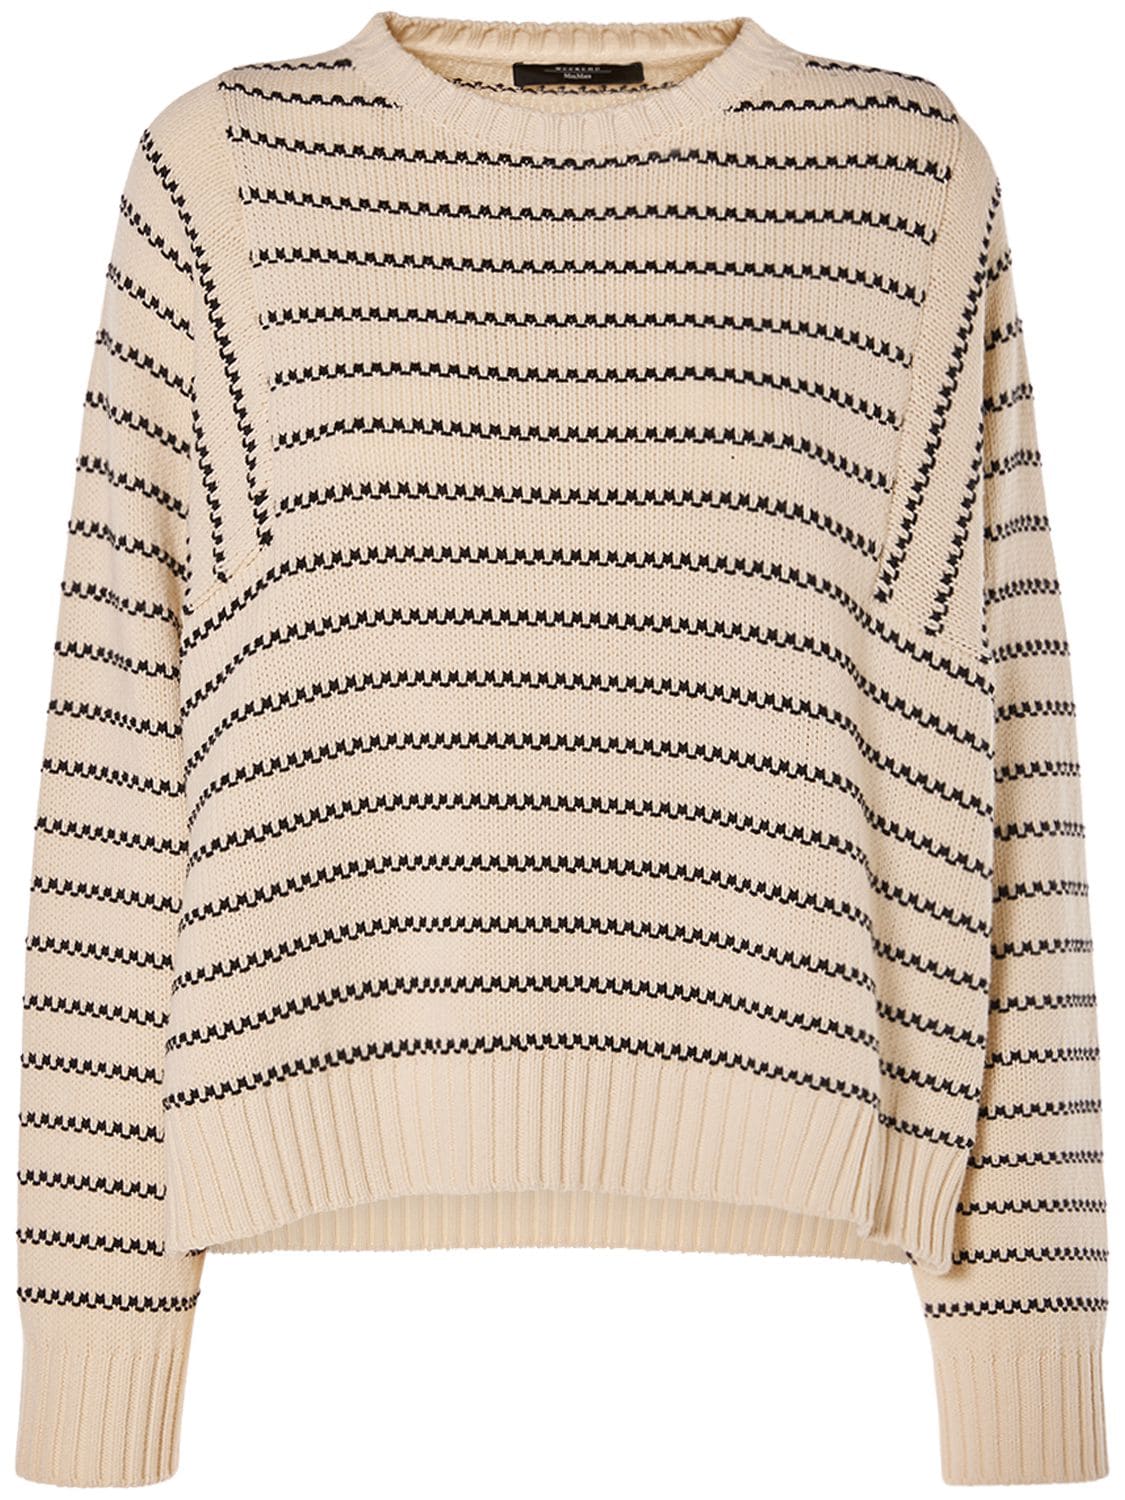 Image of Natura Striped Cotton Blend Knit Sweater